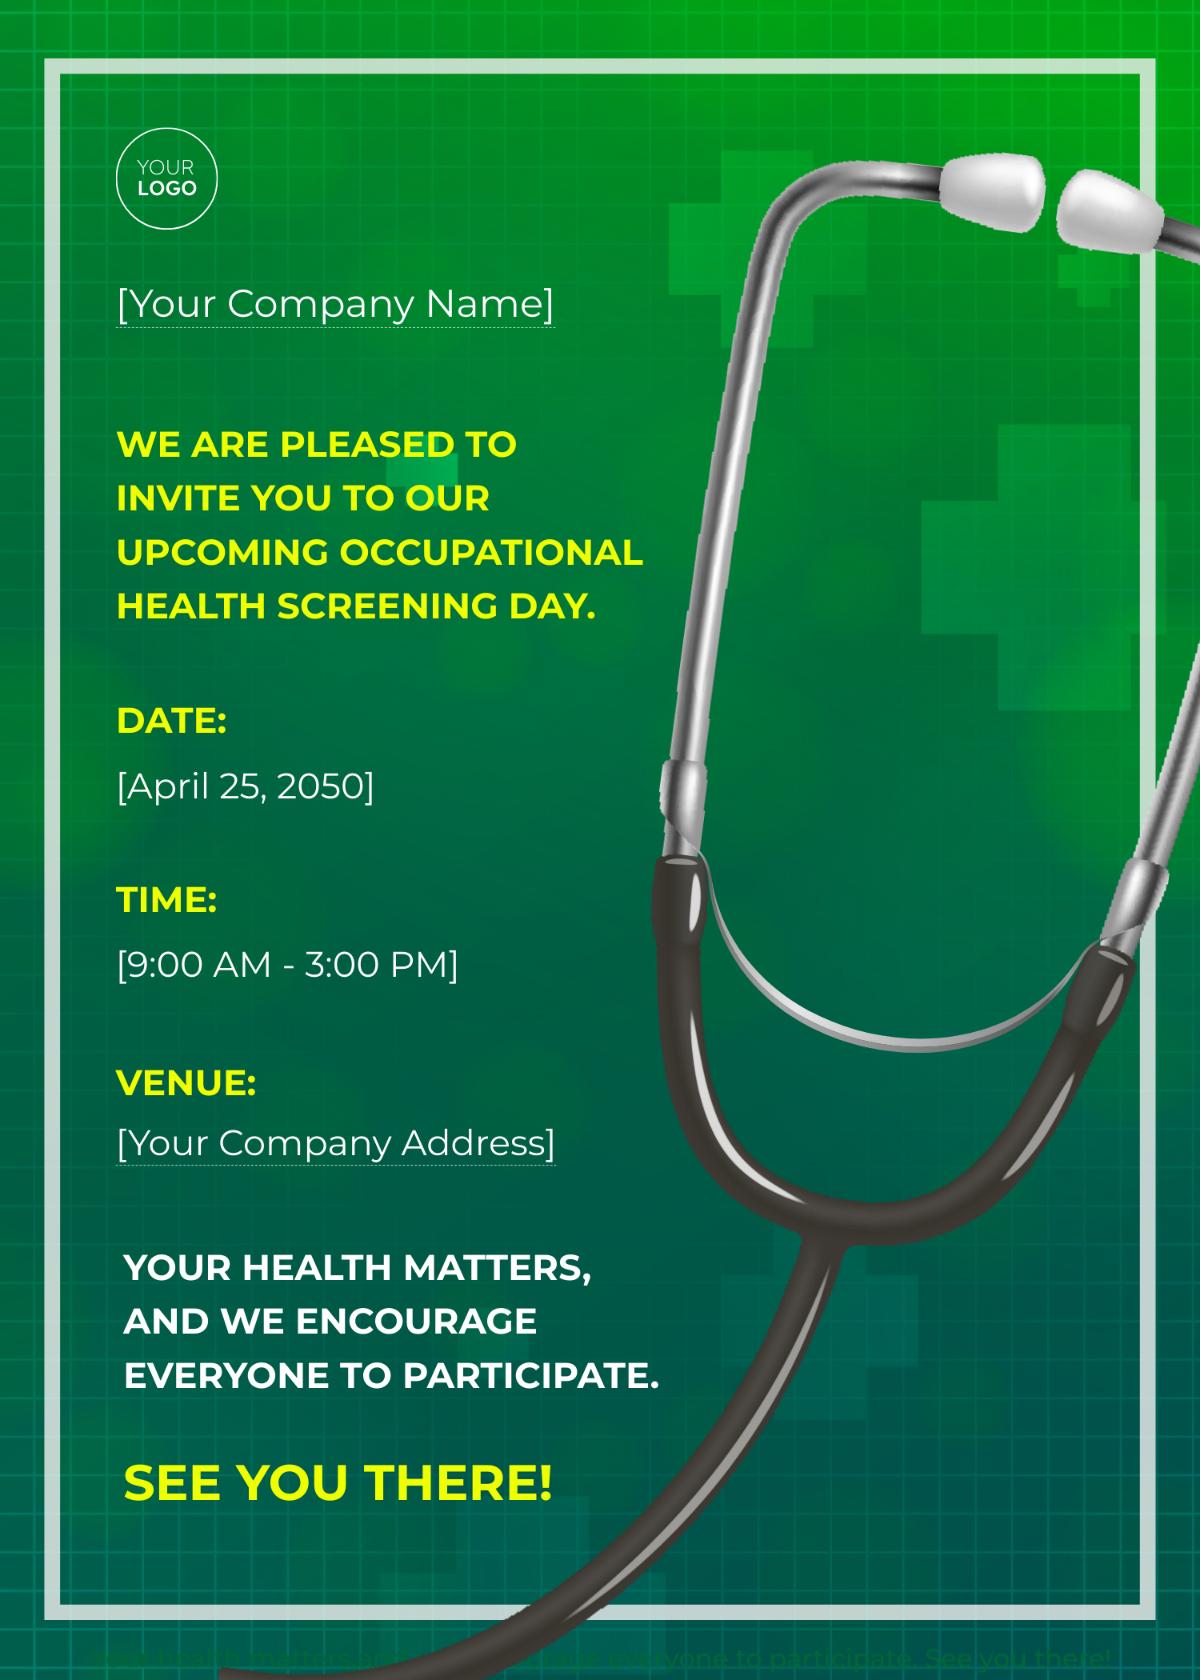 Occupational Health Screening Day Invitation Card Template